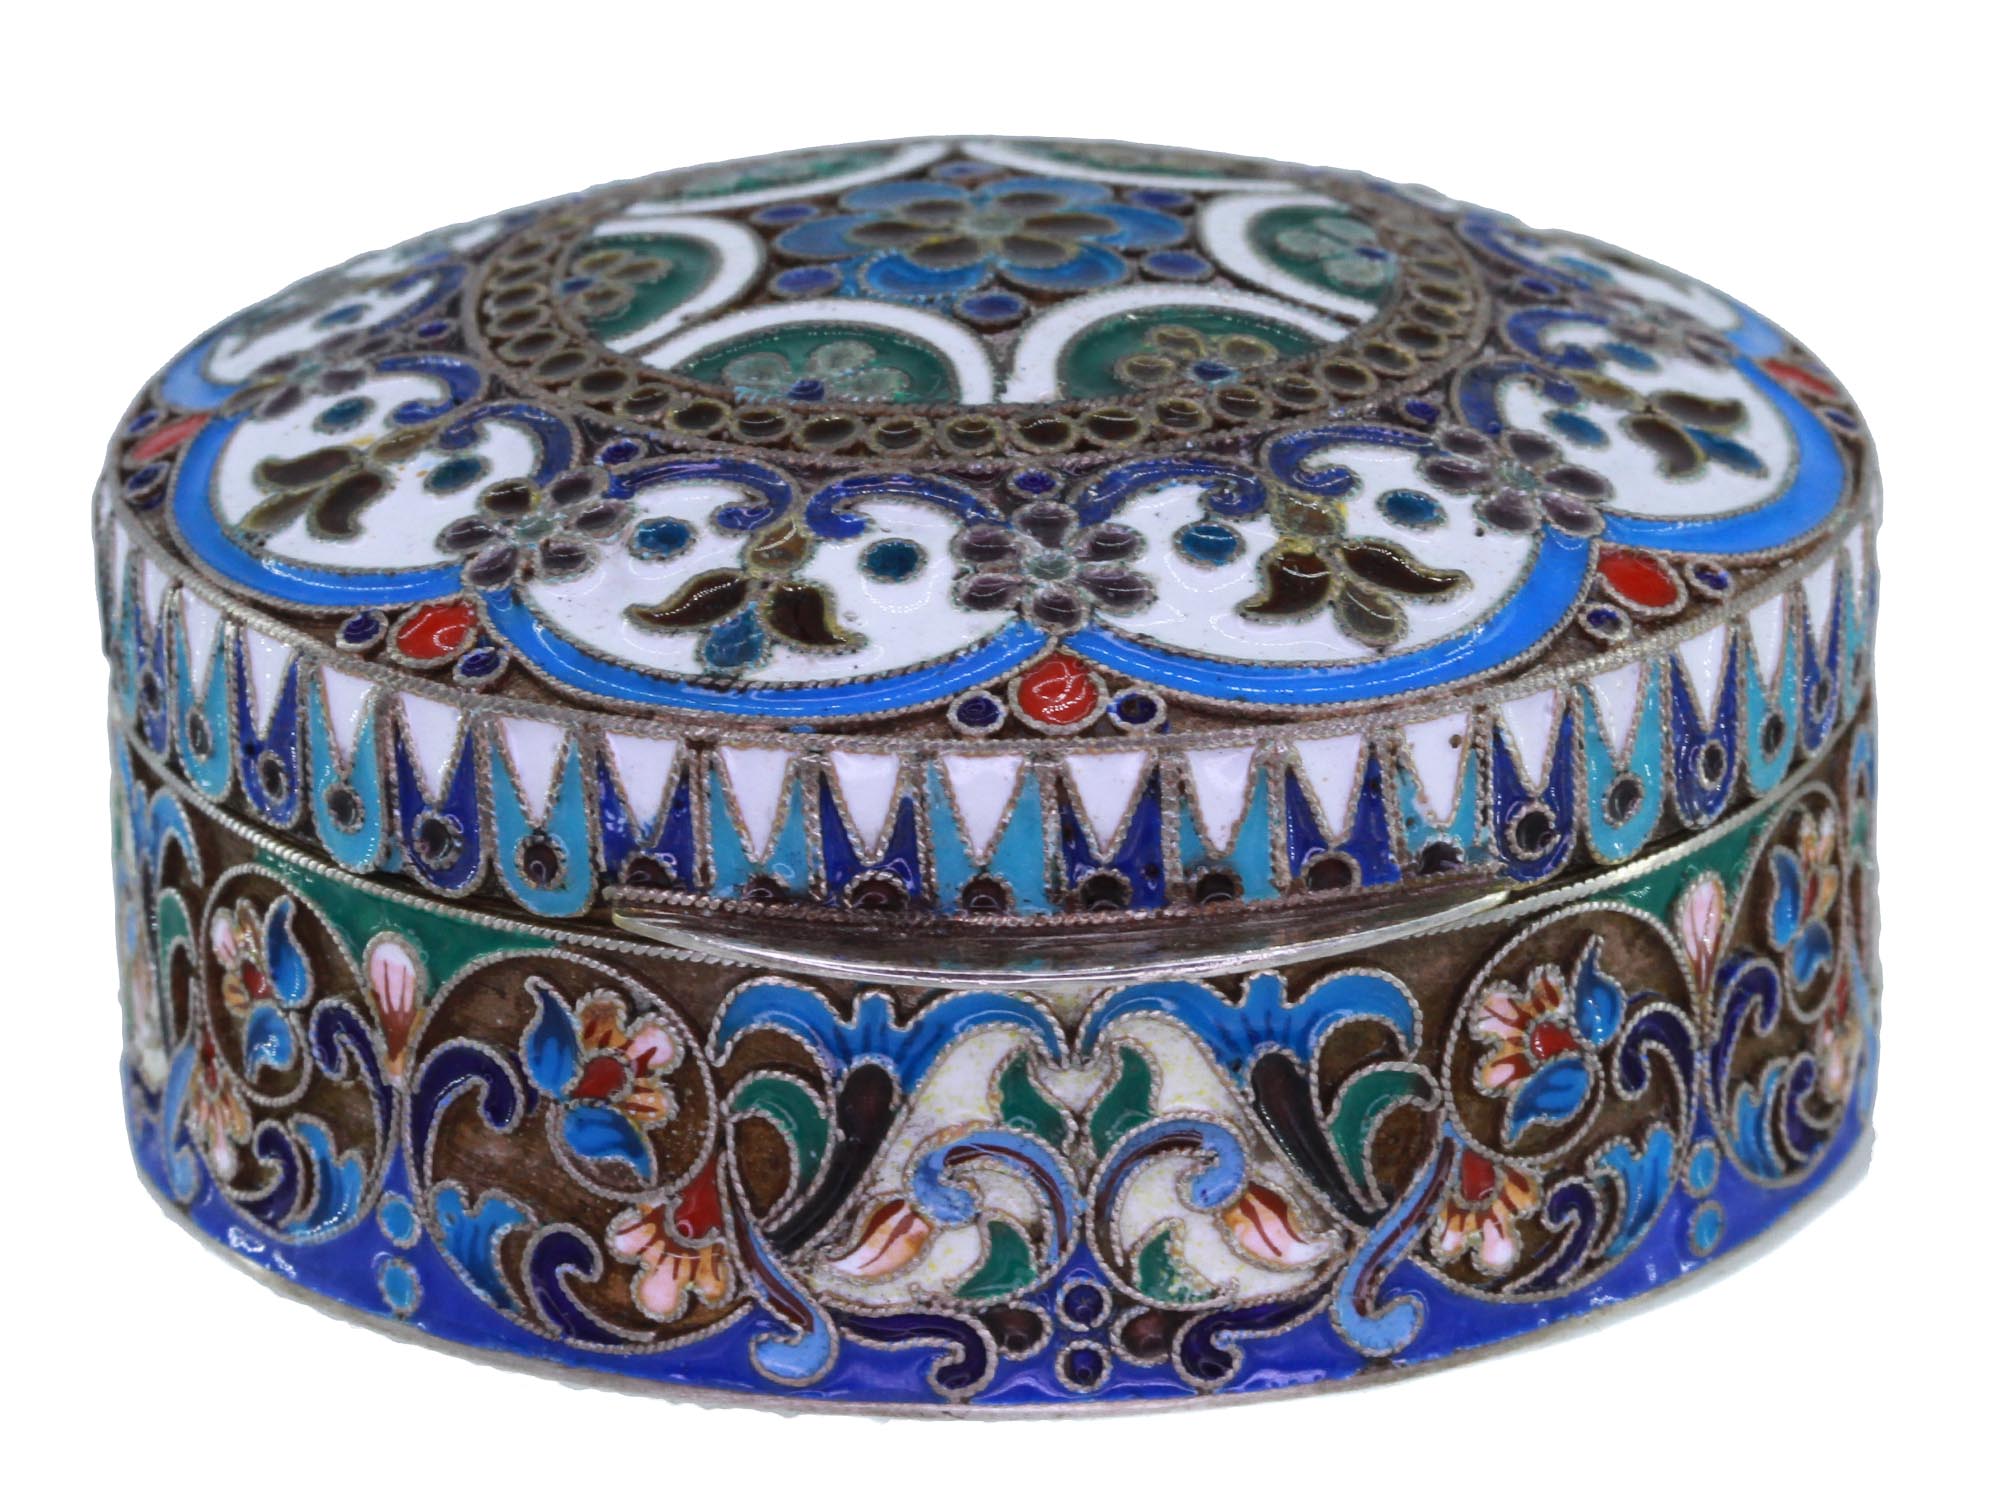 RUSSIAN SILVER AND CLOISONNE ENAMEL TRINKET BOX PIC-1